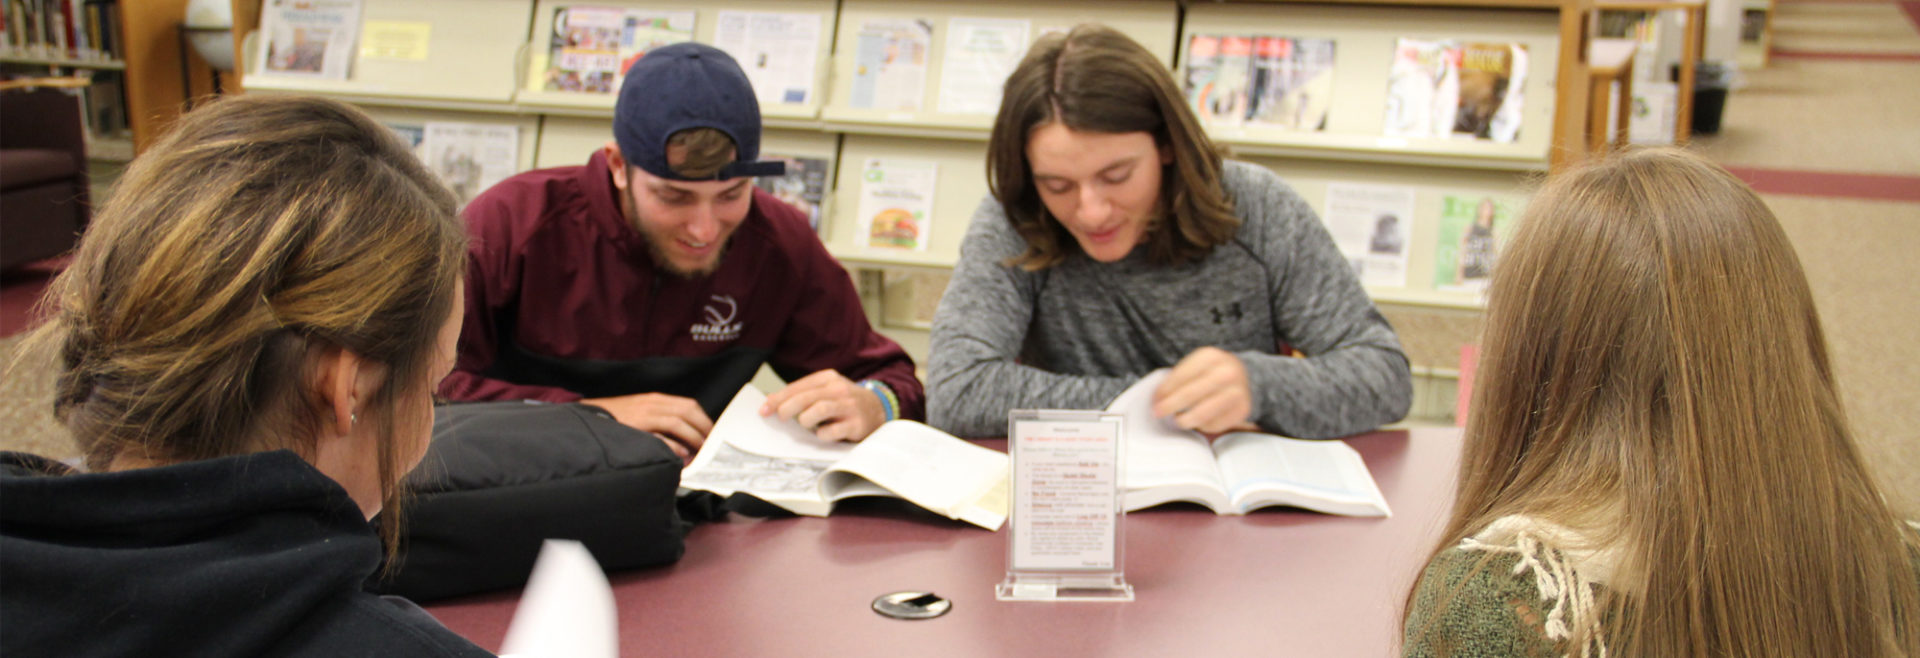 four students at a table in the library